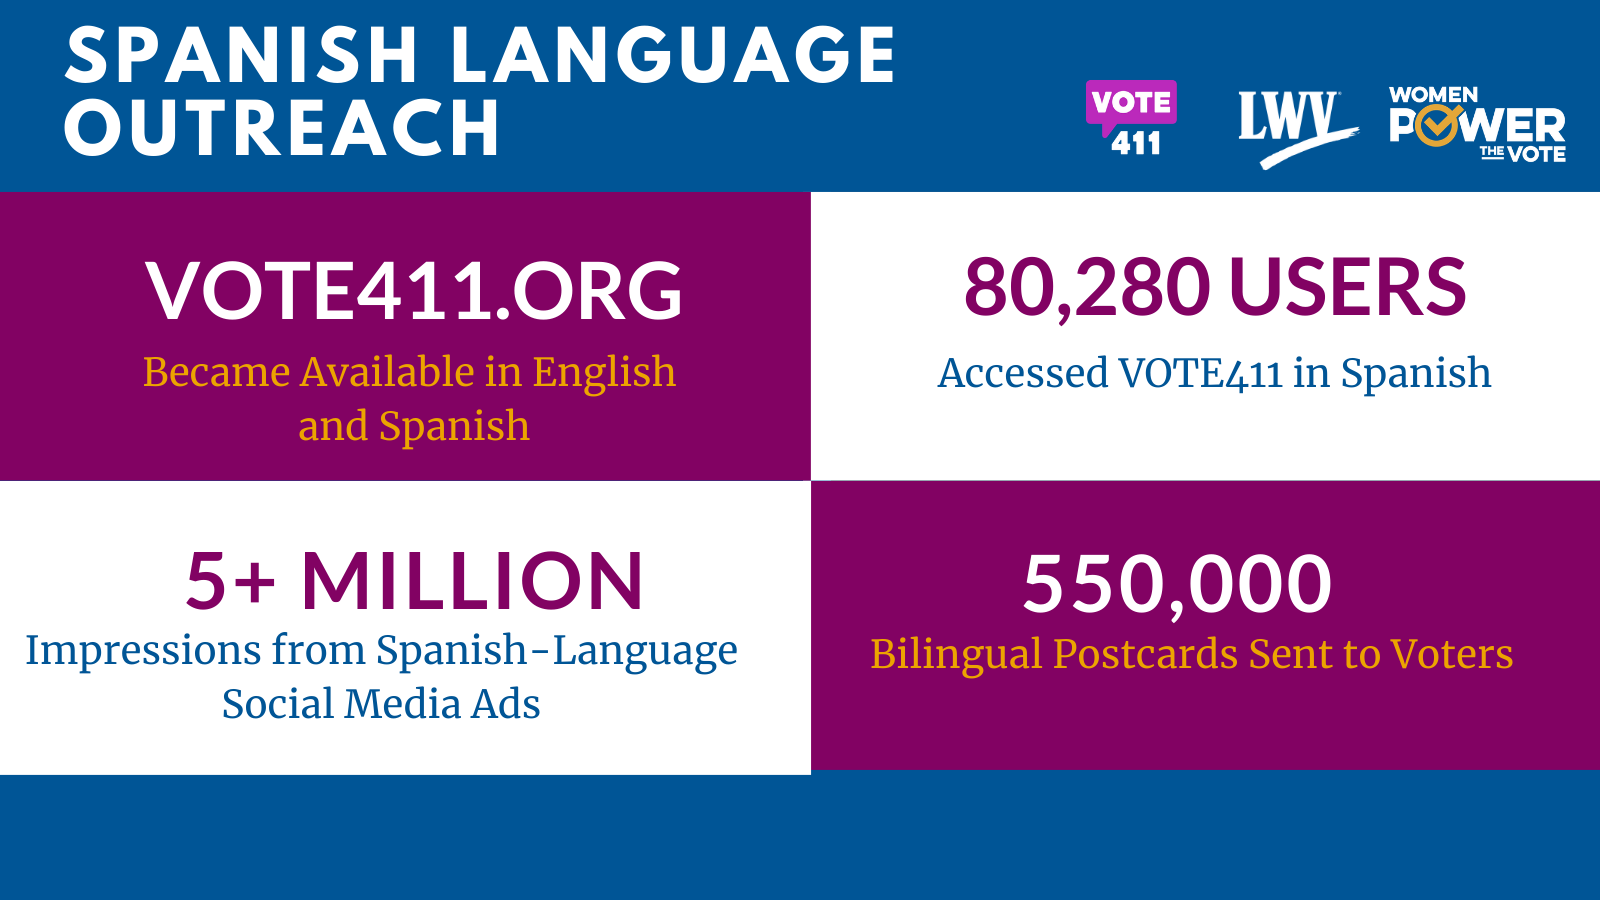 Statistics on Spanish Language outreach in 2020